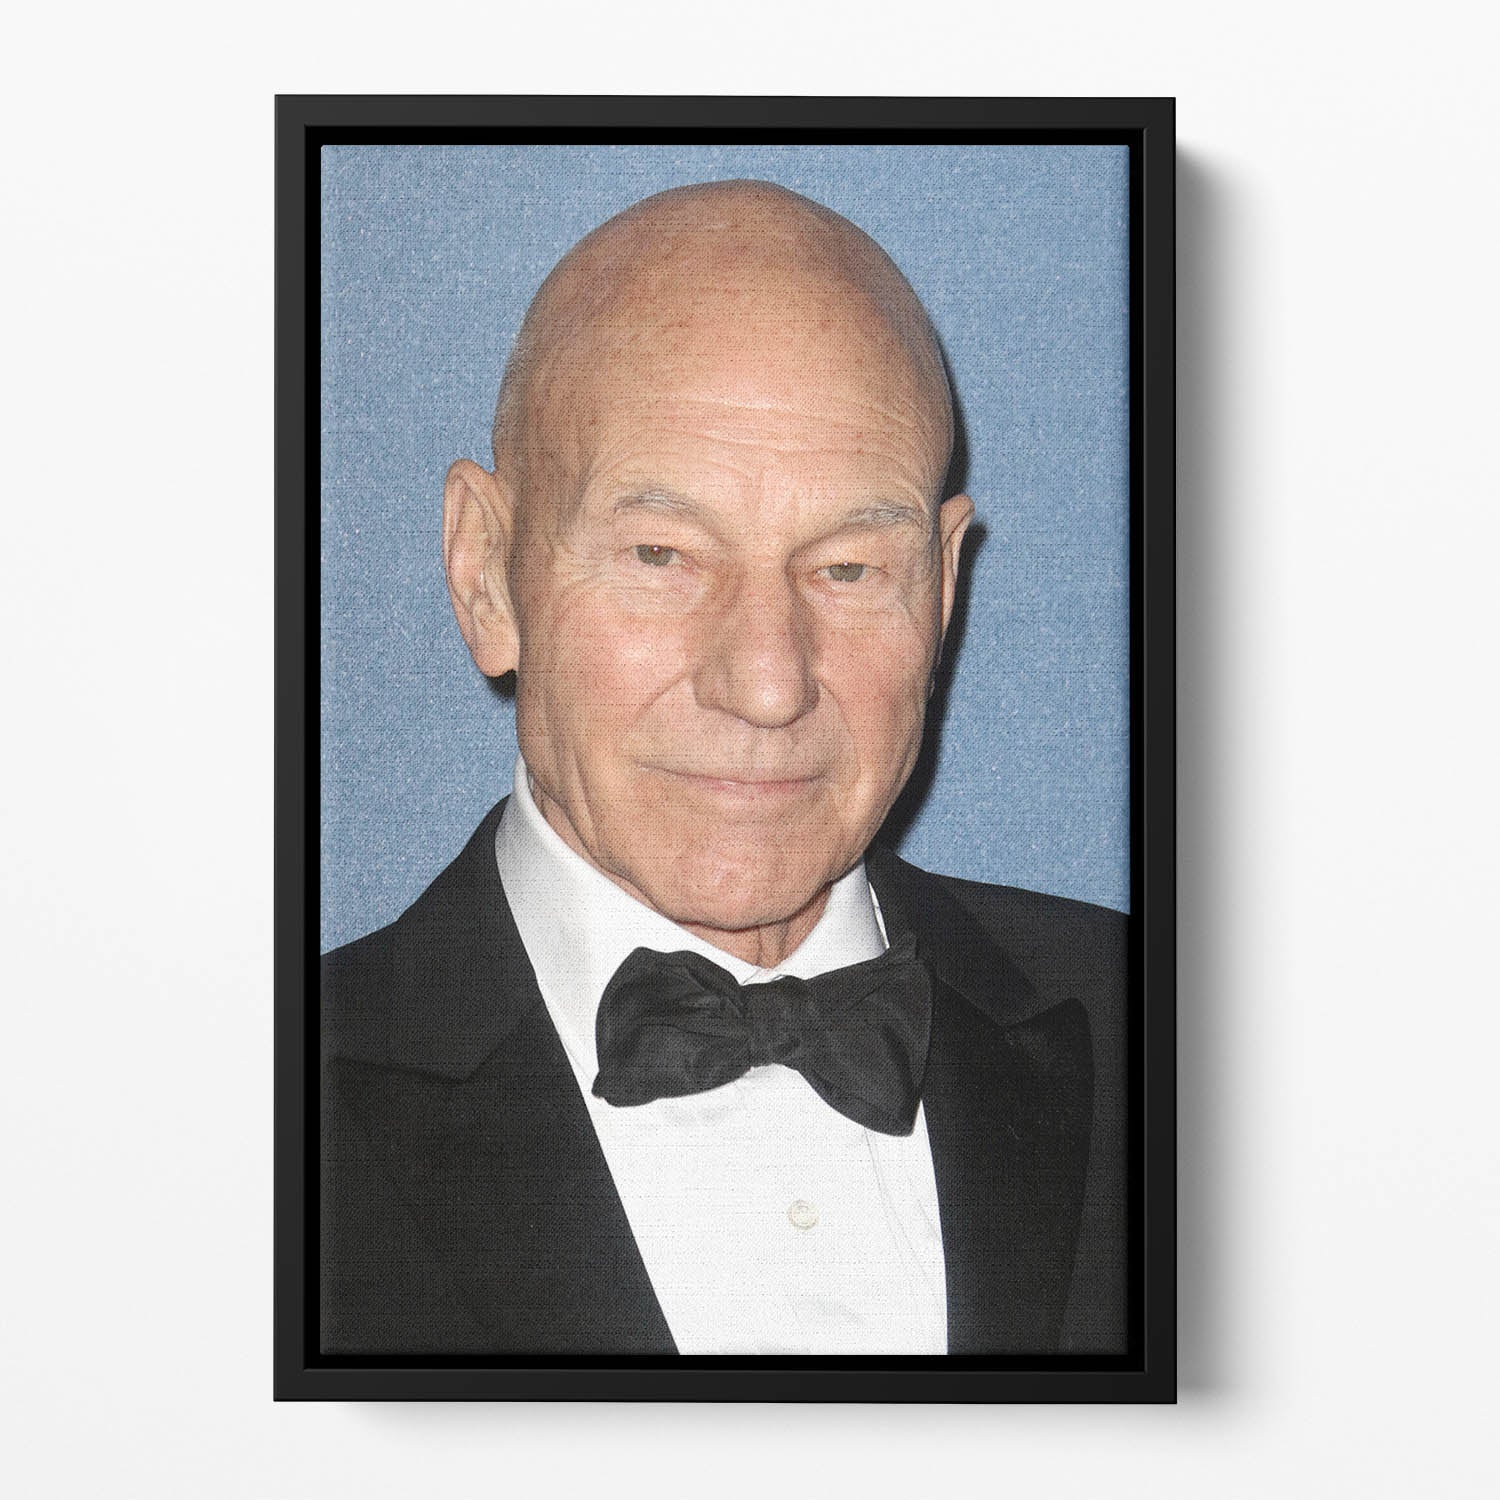 Patrick Stewart in a bow tie Floating Framed Canvas